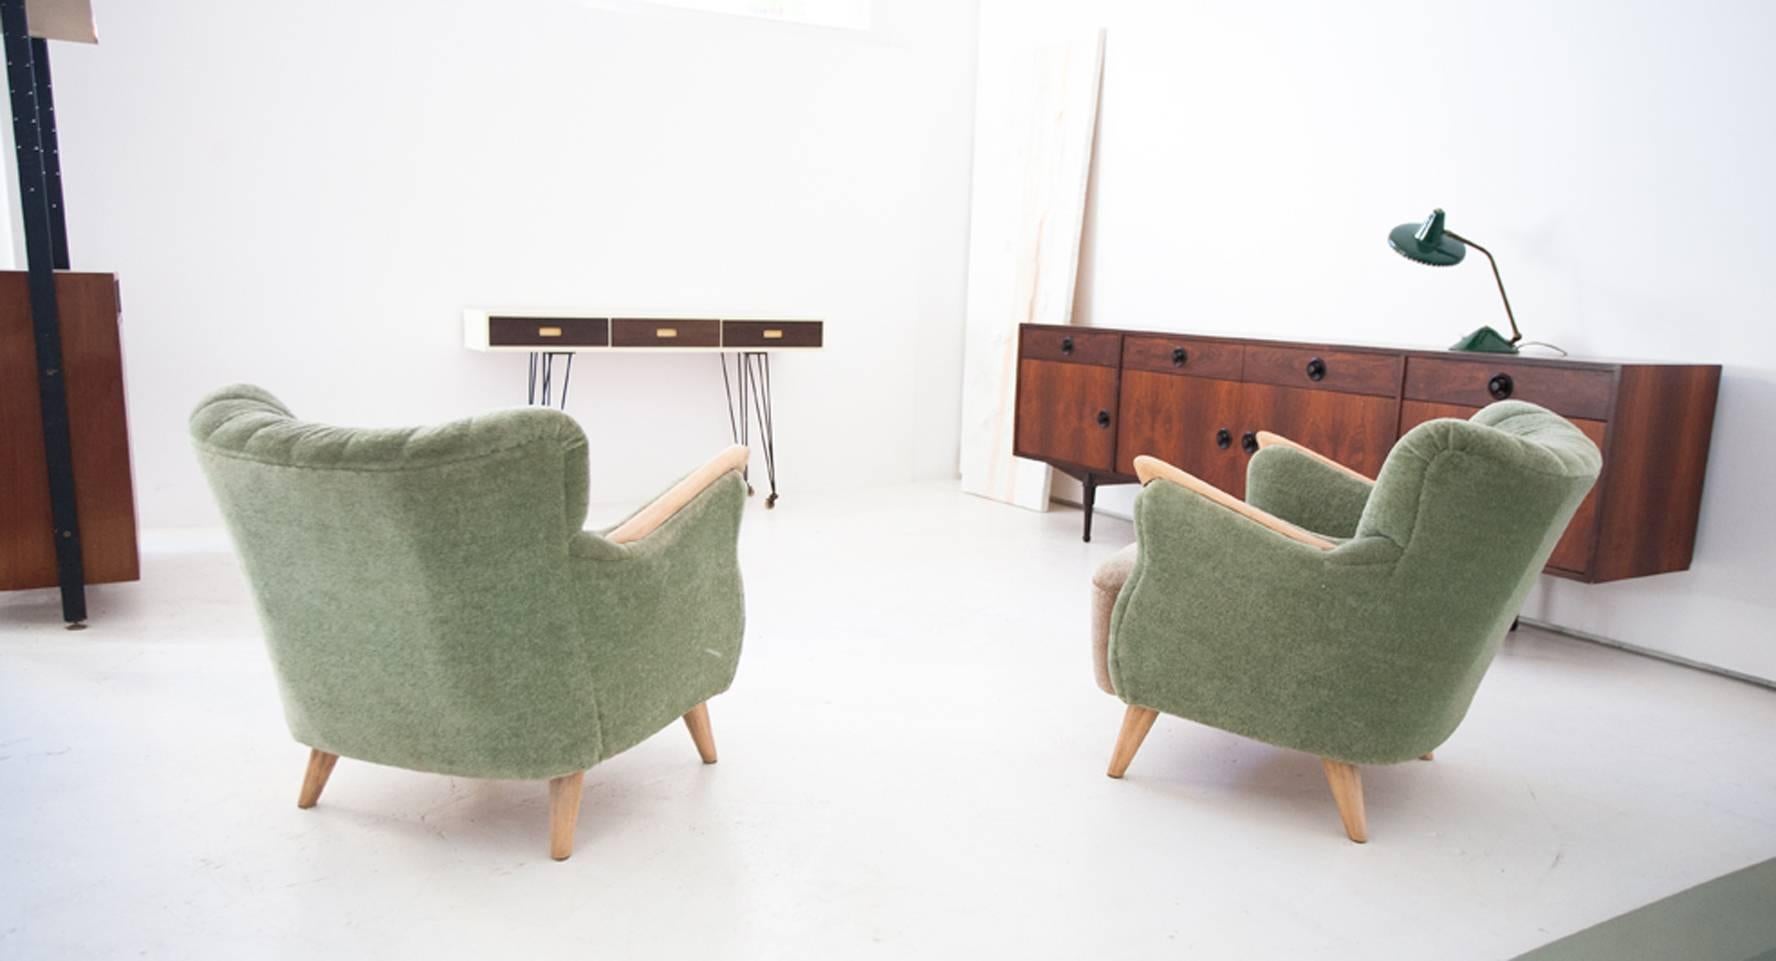 This set of two chairs originates from Denmark and were produced in the 1950s. They are upholstered in the original pastel green and beige fabric.